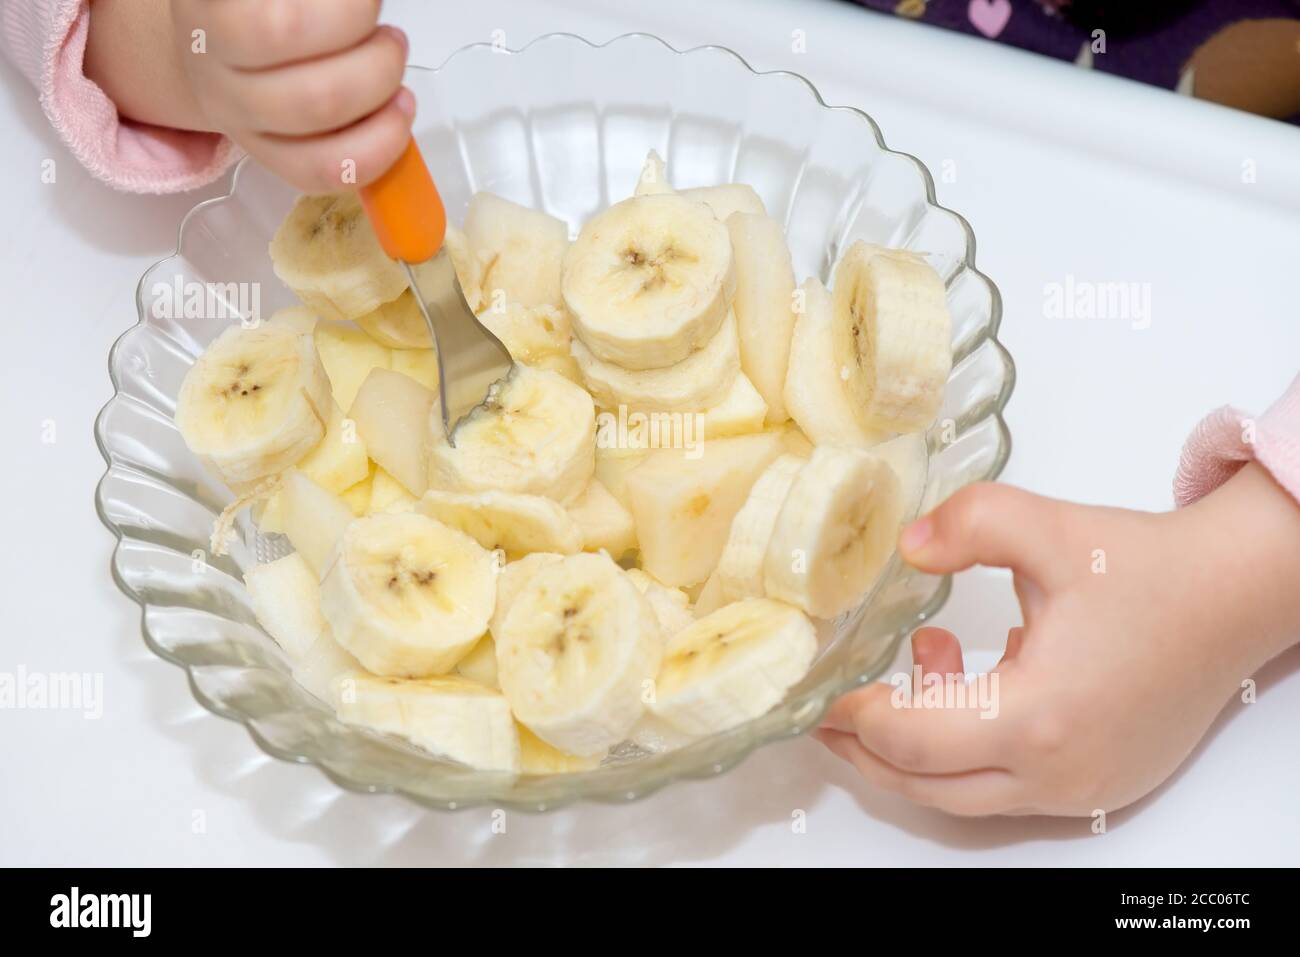 Detail of a glass bowl with banana slices and baby hands Stock Photo